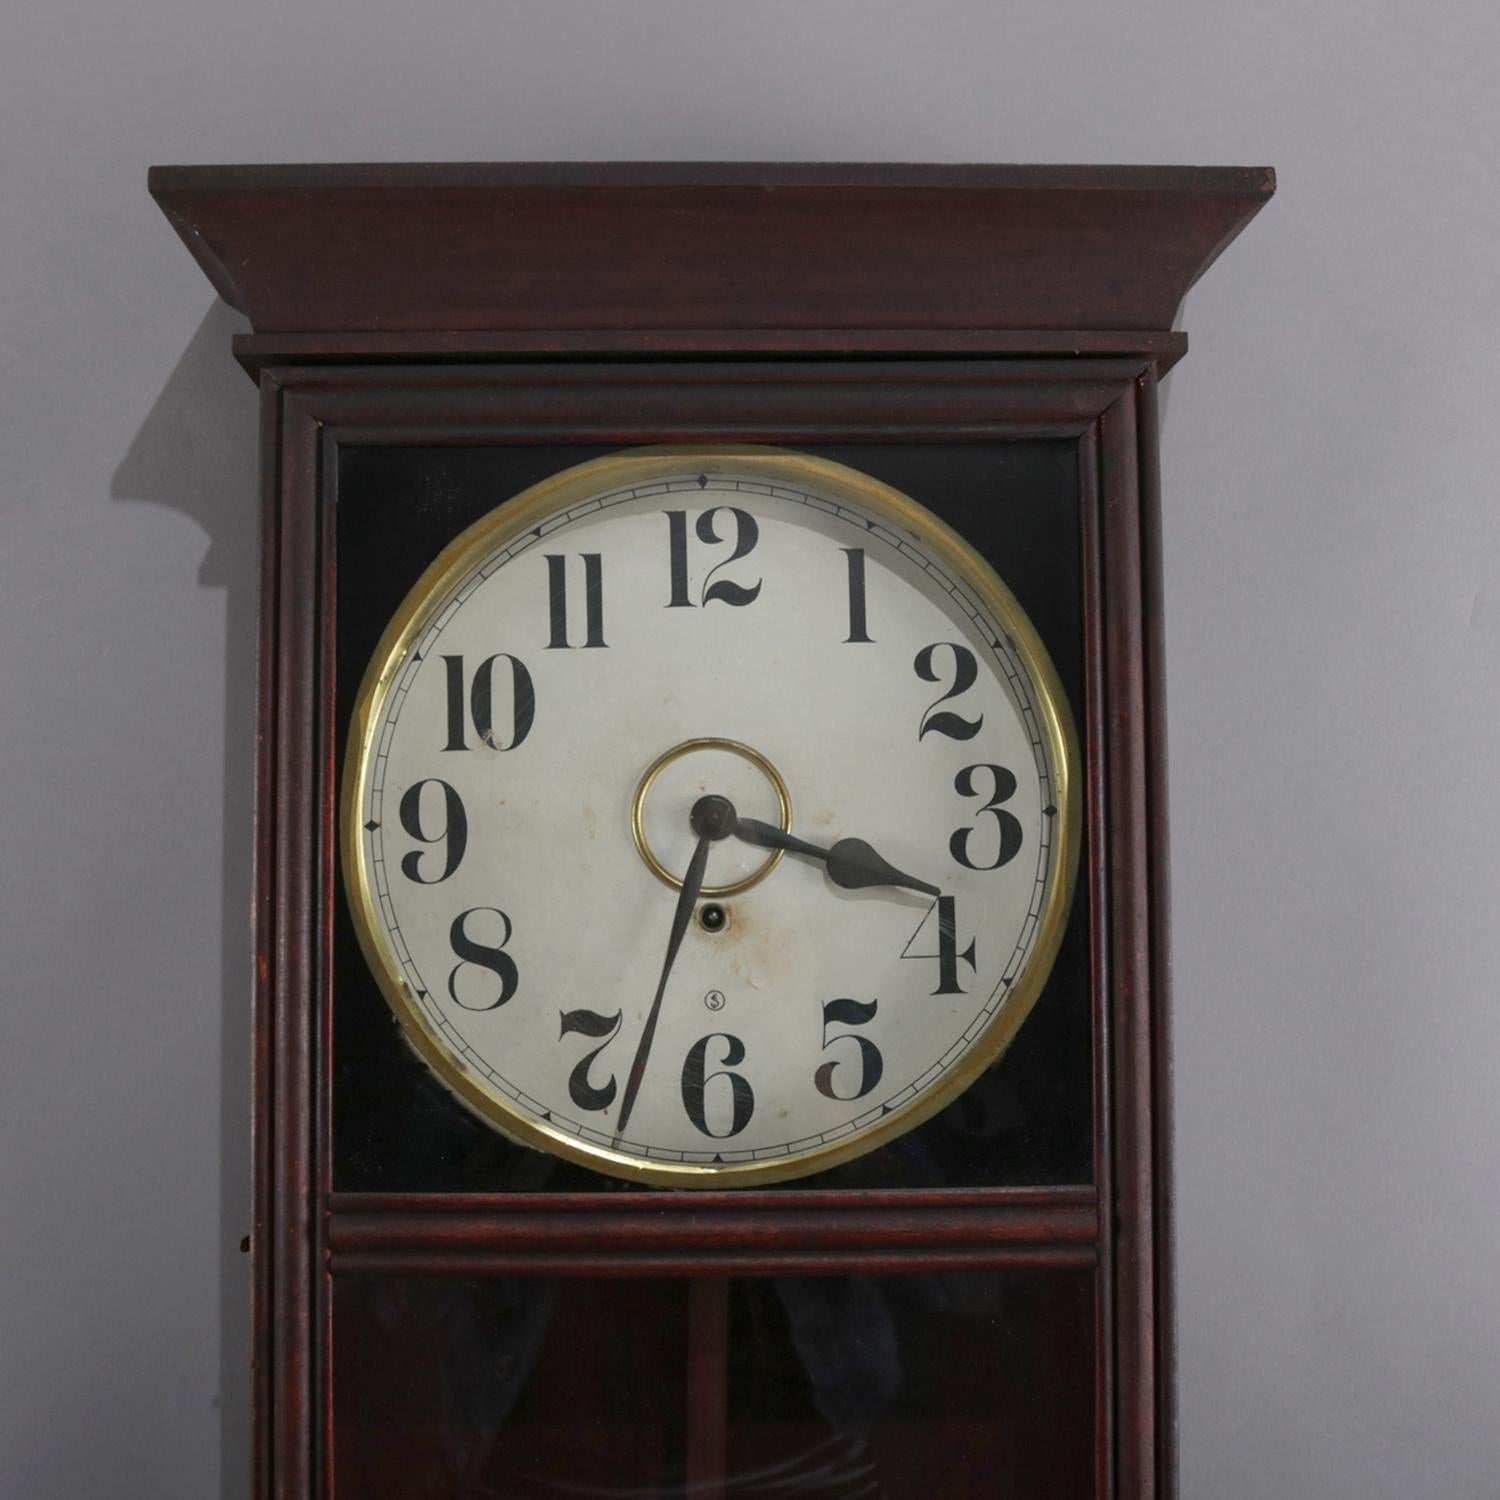 Antique Seth Thomas School University model regulator wall clock by Gilbert Clock Company features mahogany case and face by E & J Swiigart with Arabic numerals and signed ESJ, working and with key, circa 1913

Measures: 34.5